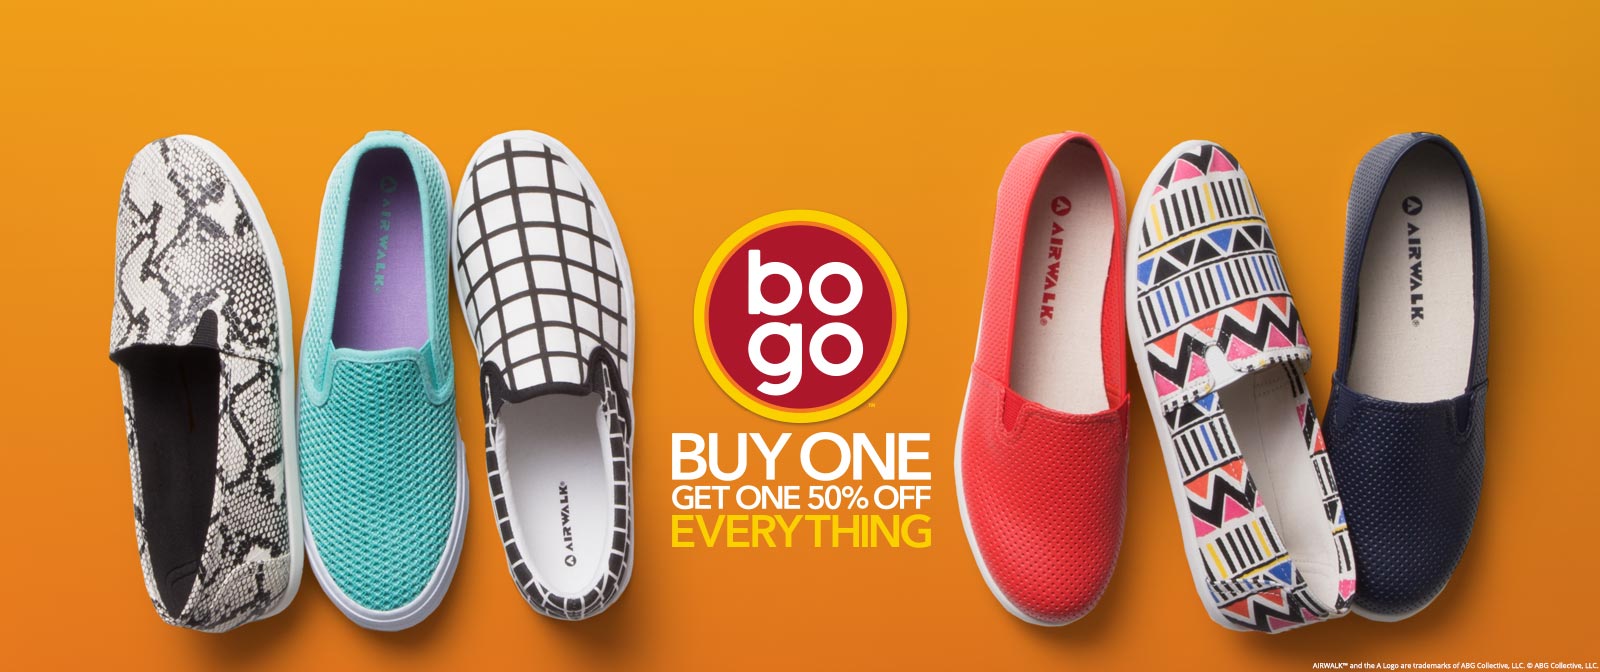 payless shoes online shopping